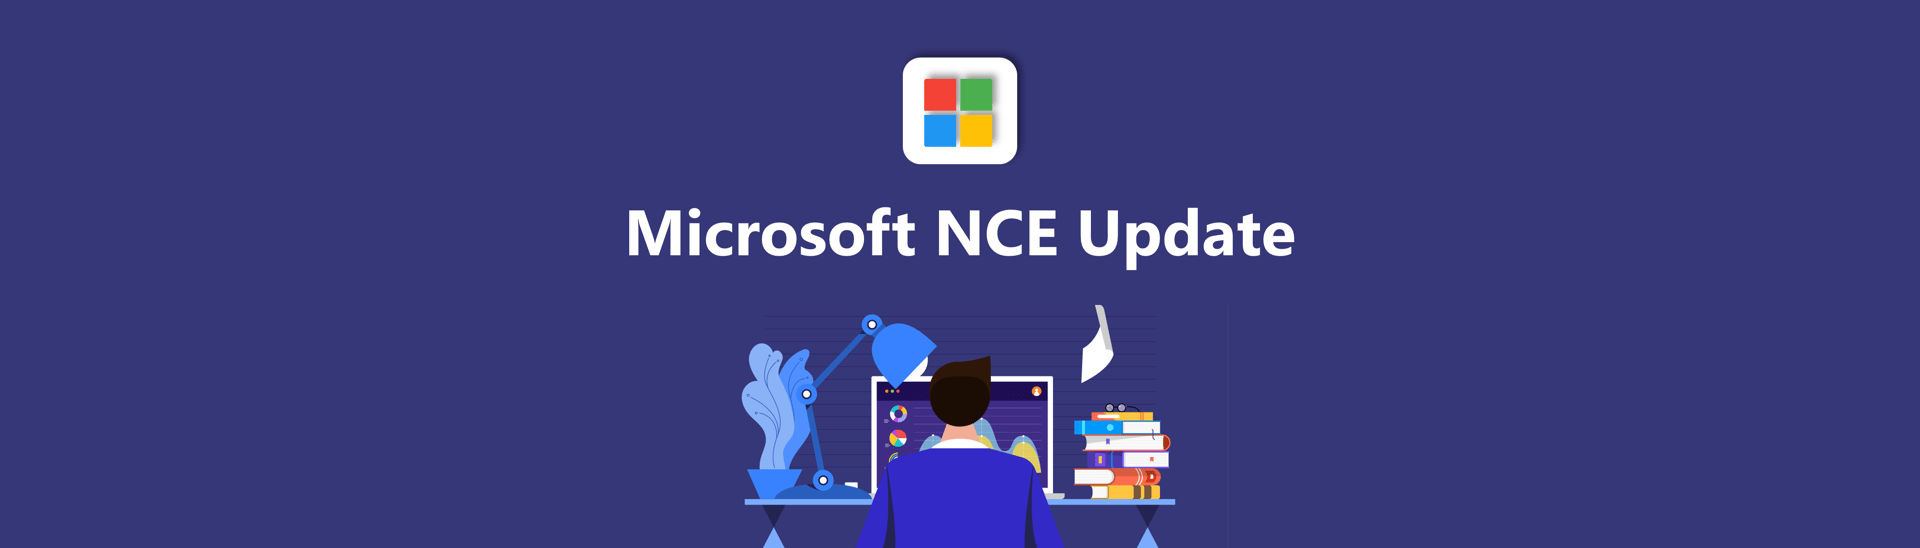 Availability of Microsoft Academic and Nonprofit SKUs in NCE